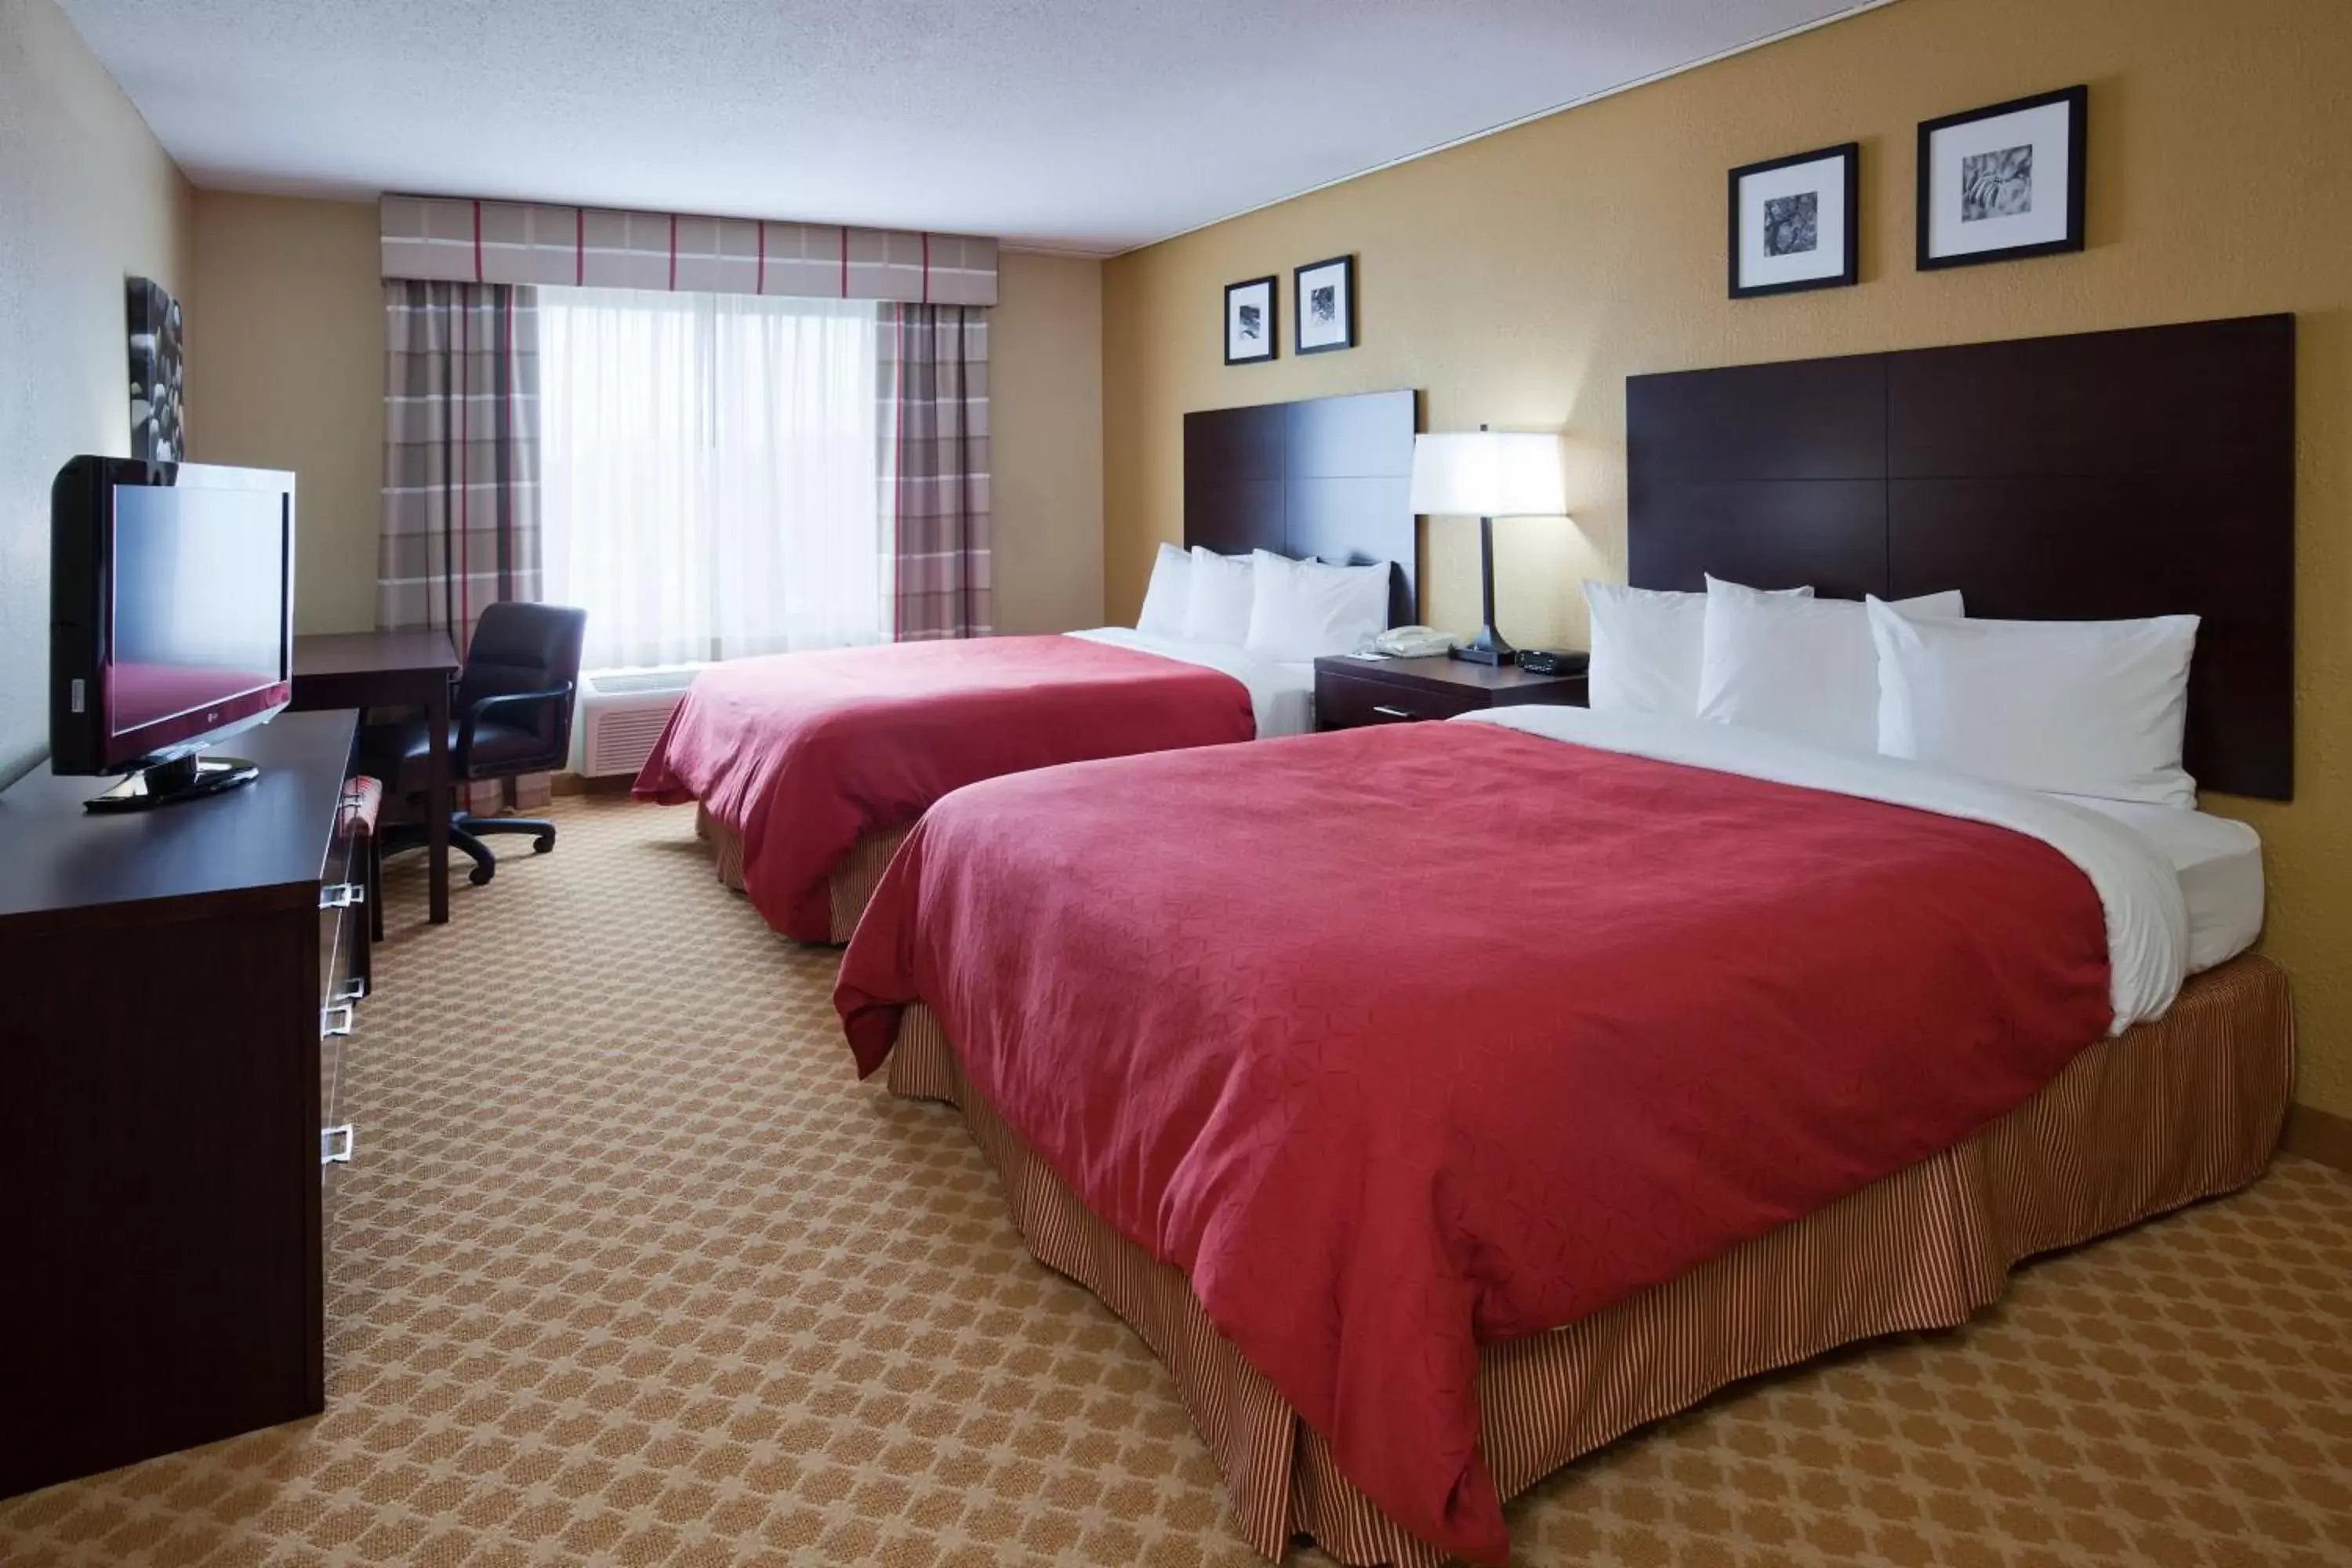 Queen Room with Two Queen Beds - Non-Smoking in Country Inn & Suites by Radisson, Coon Rapids, MN